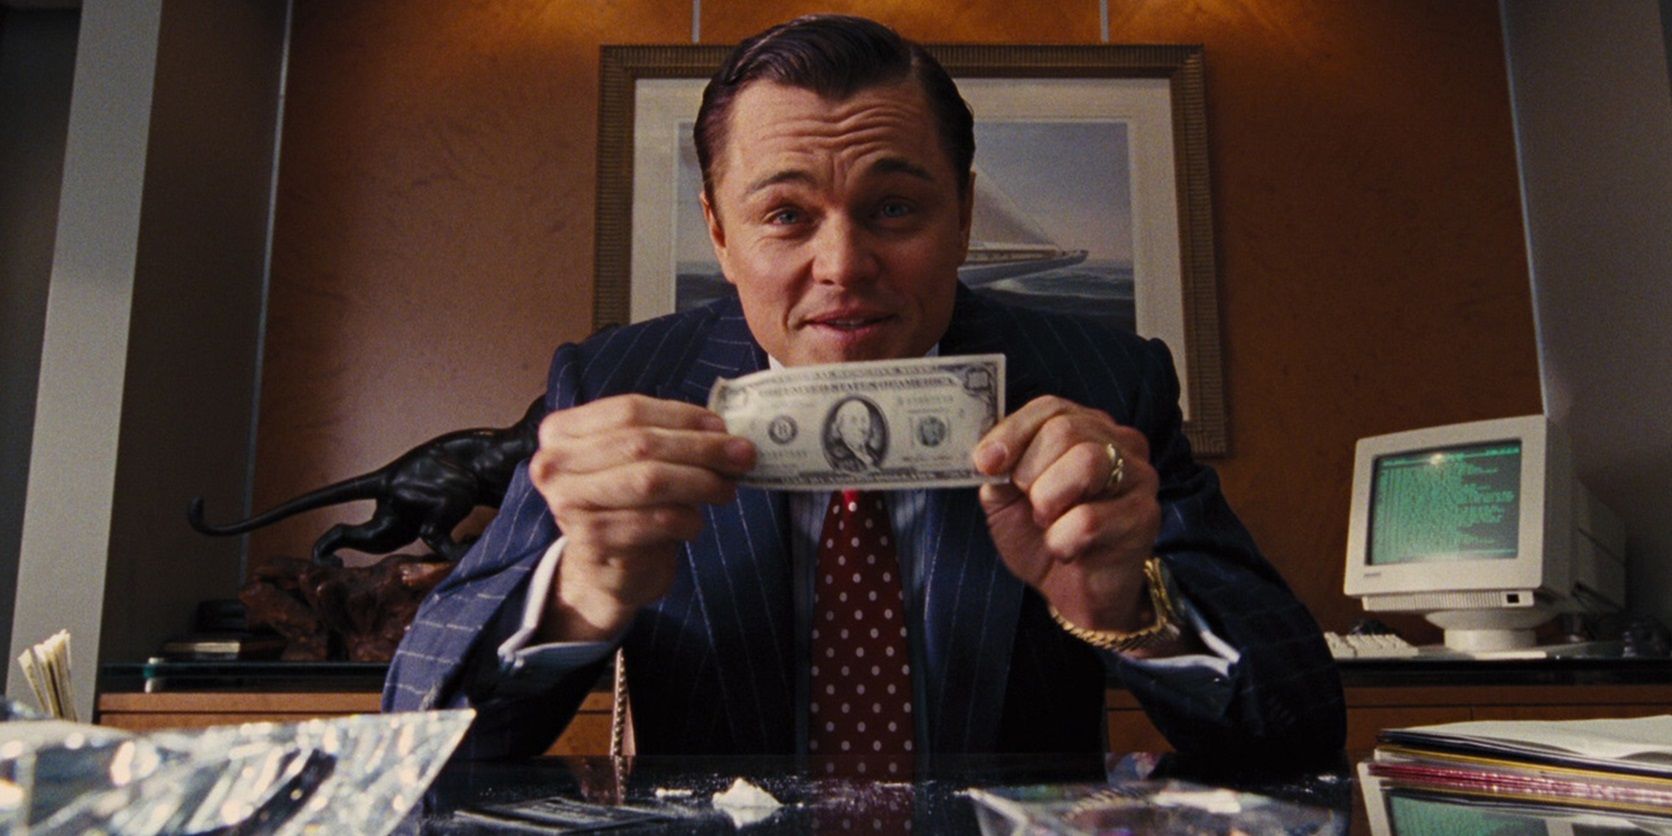 Jordan with a 100 dollar bill in The Wolf of Wall Street